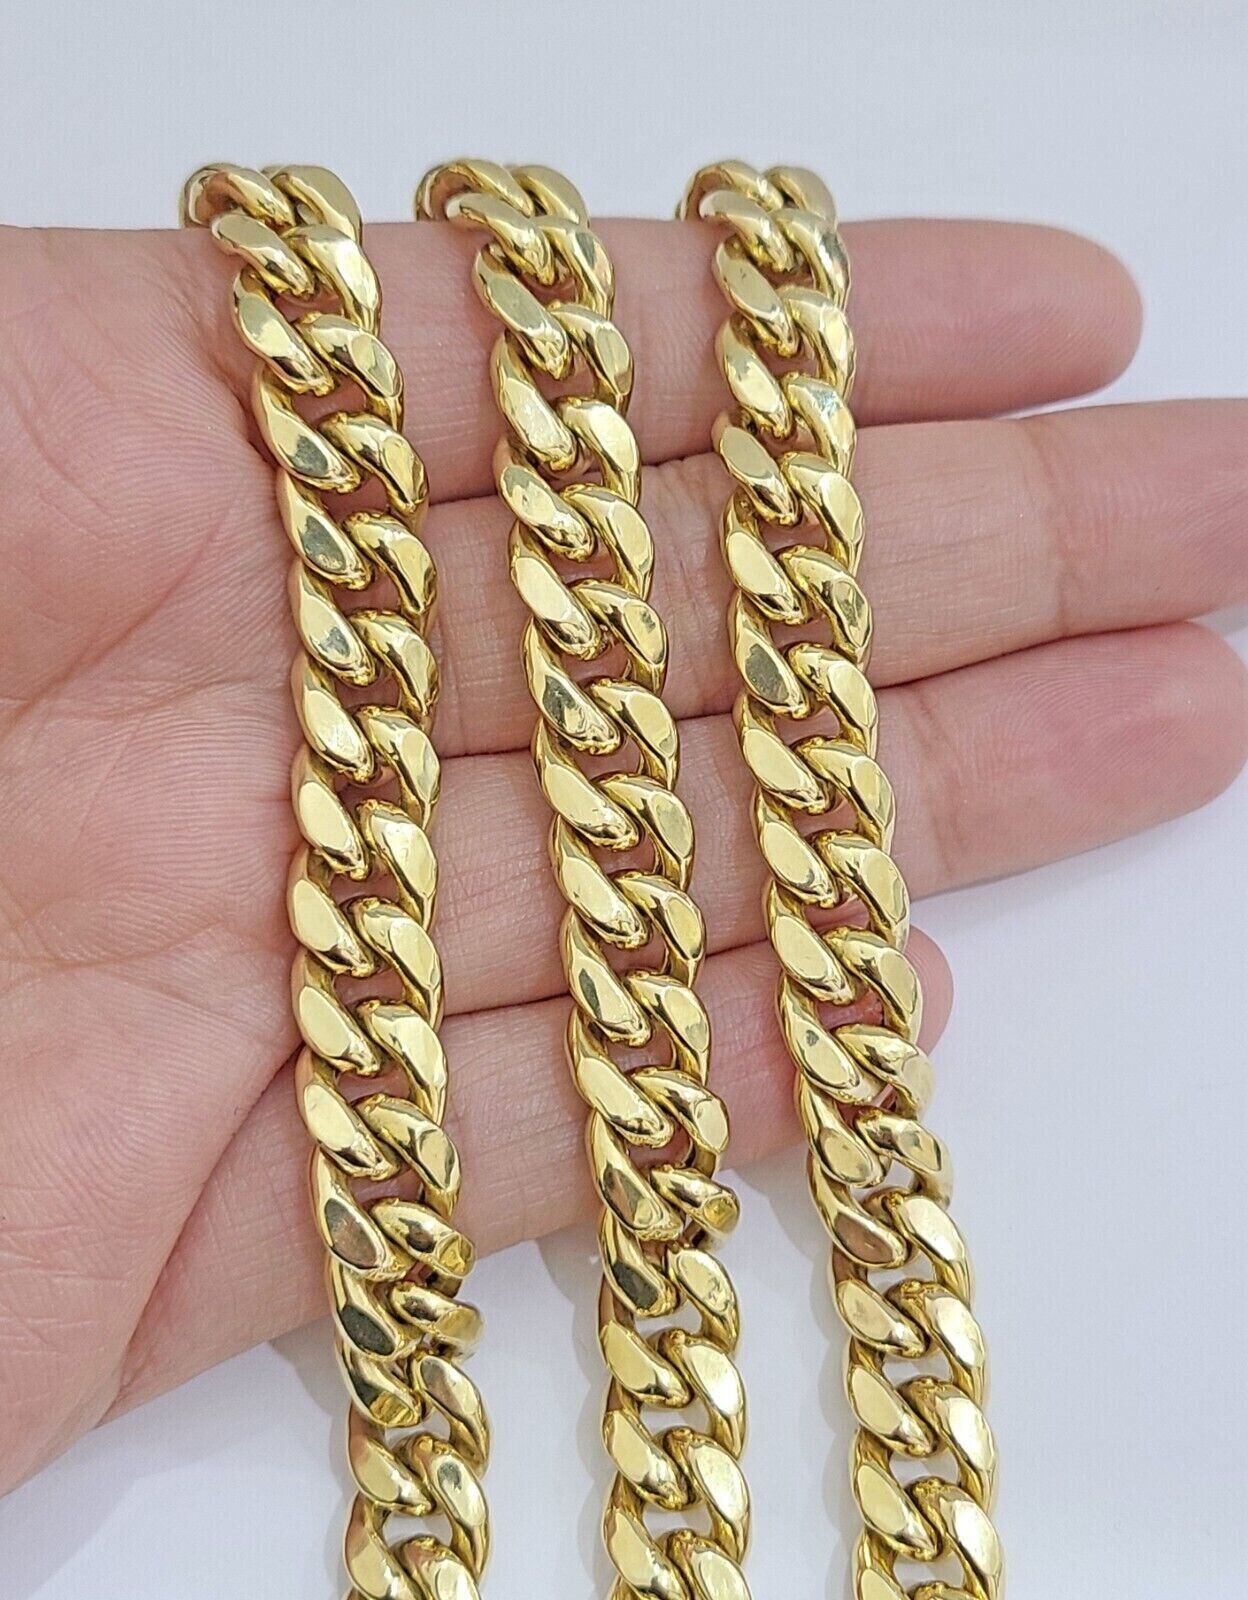 Real 14k Gold Chain 24 Inch Miami Cuban Link Necklace 9mm Strong Mens 14KT Gold